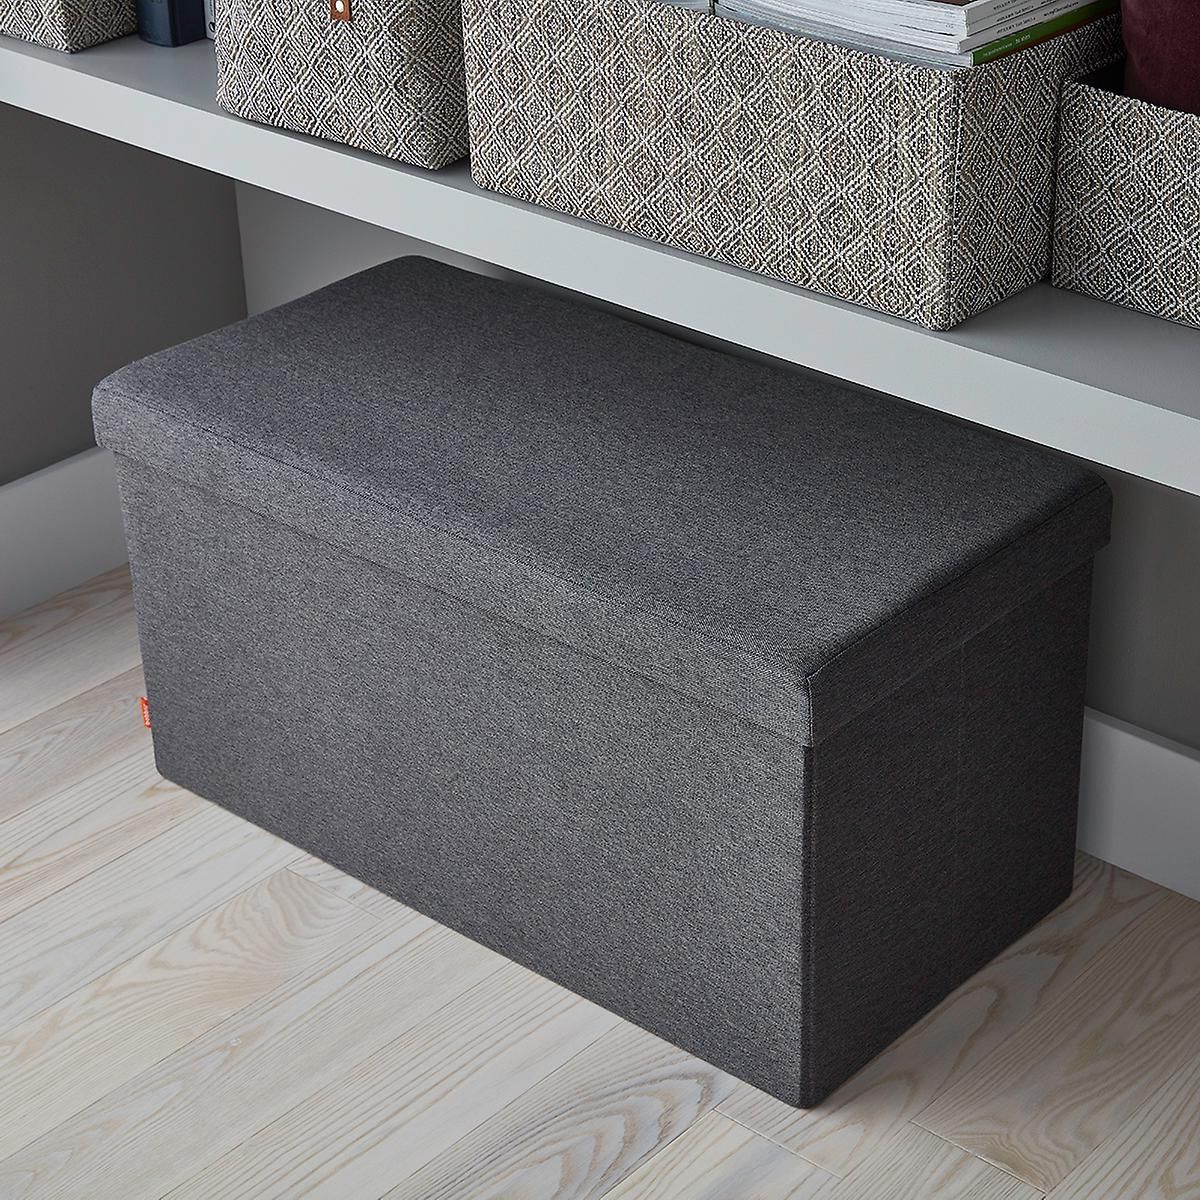 Decorative Storage Bins, Storage In Charcoal And Camel Basket Weave Pouf Ottomans (View 3 of 10)